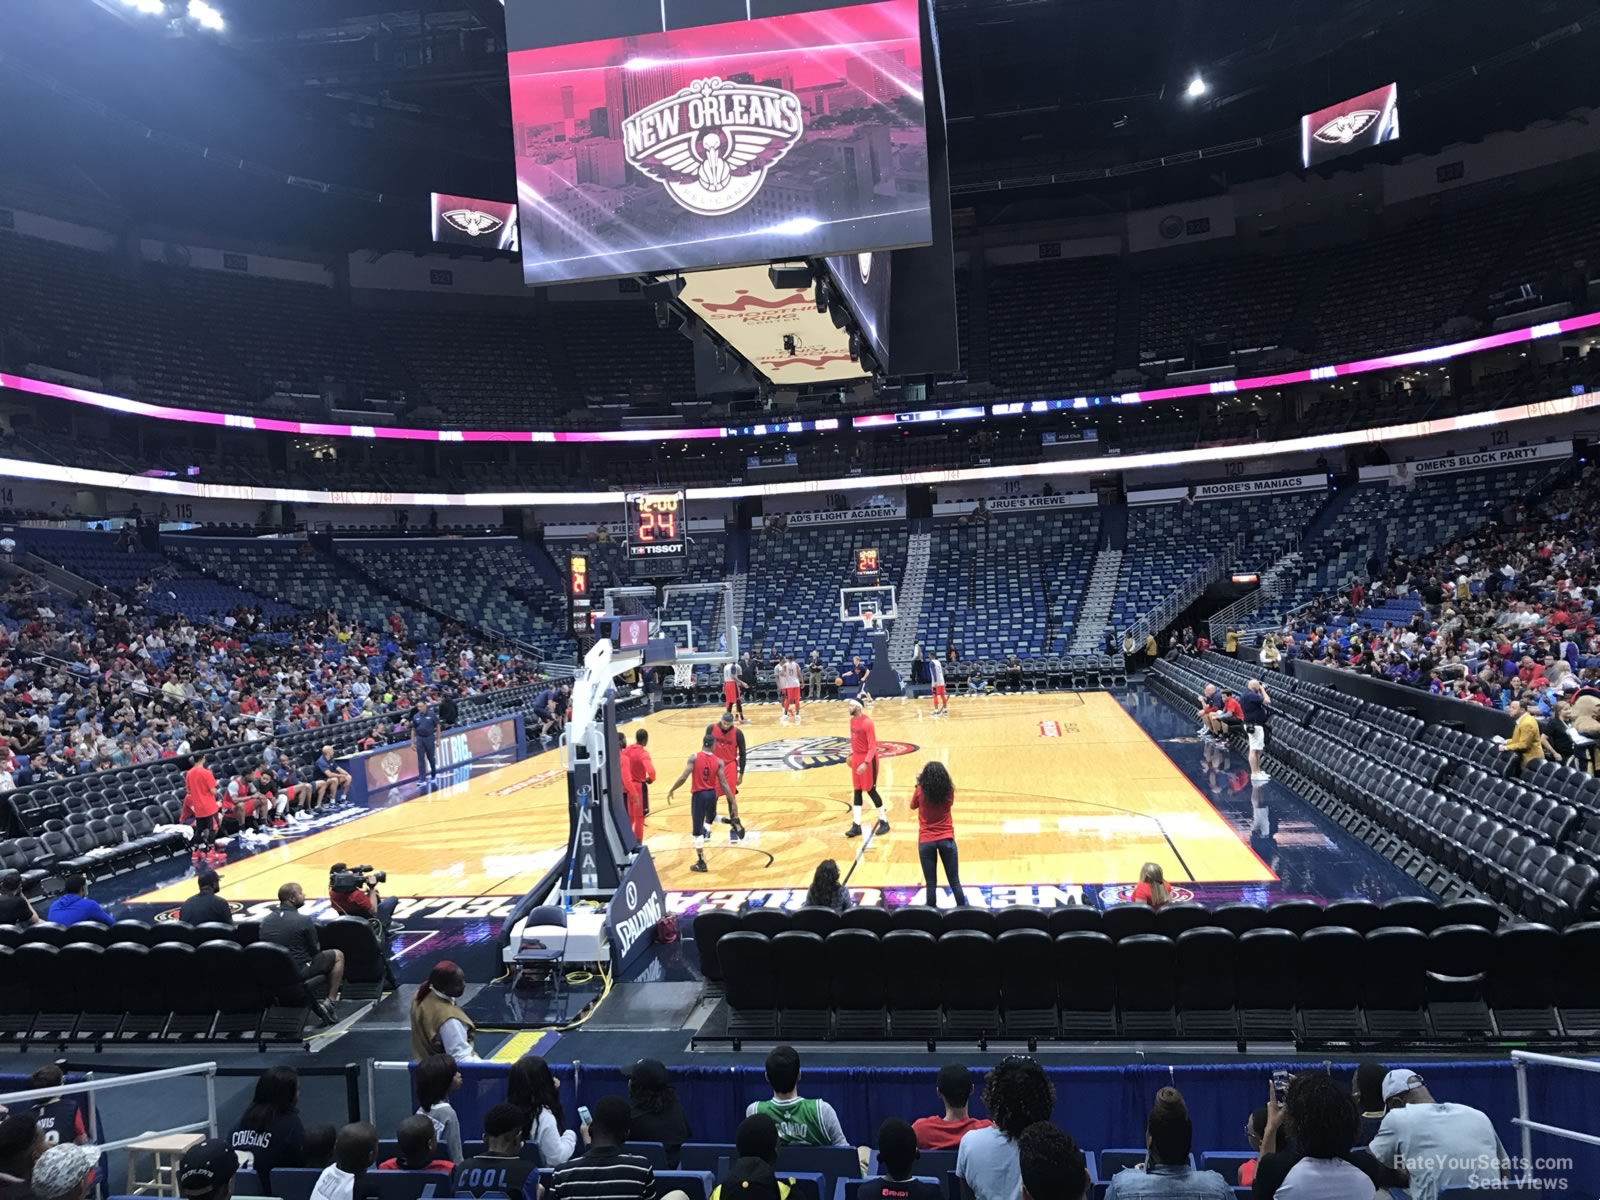 Food at Smoothie King Center: Exploring Your Options - The Stadiums Guide